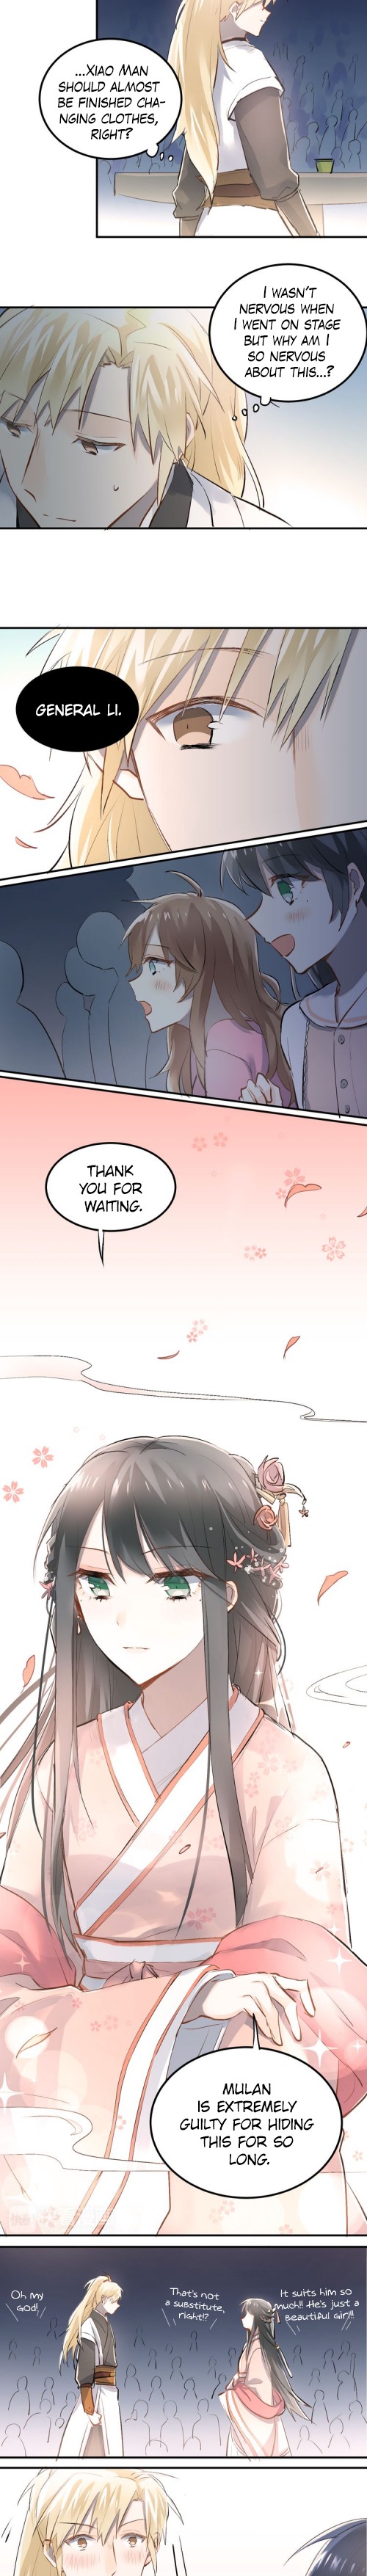 The Tyrant Falls In Love ch.31